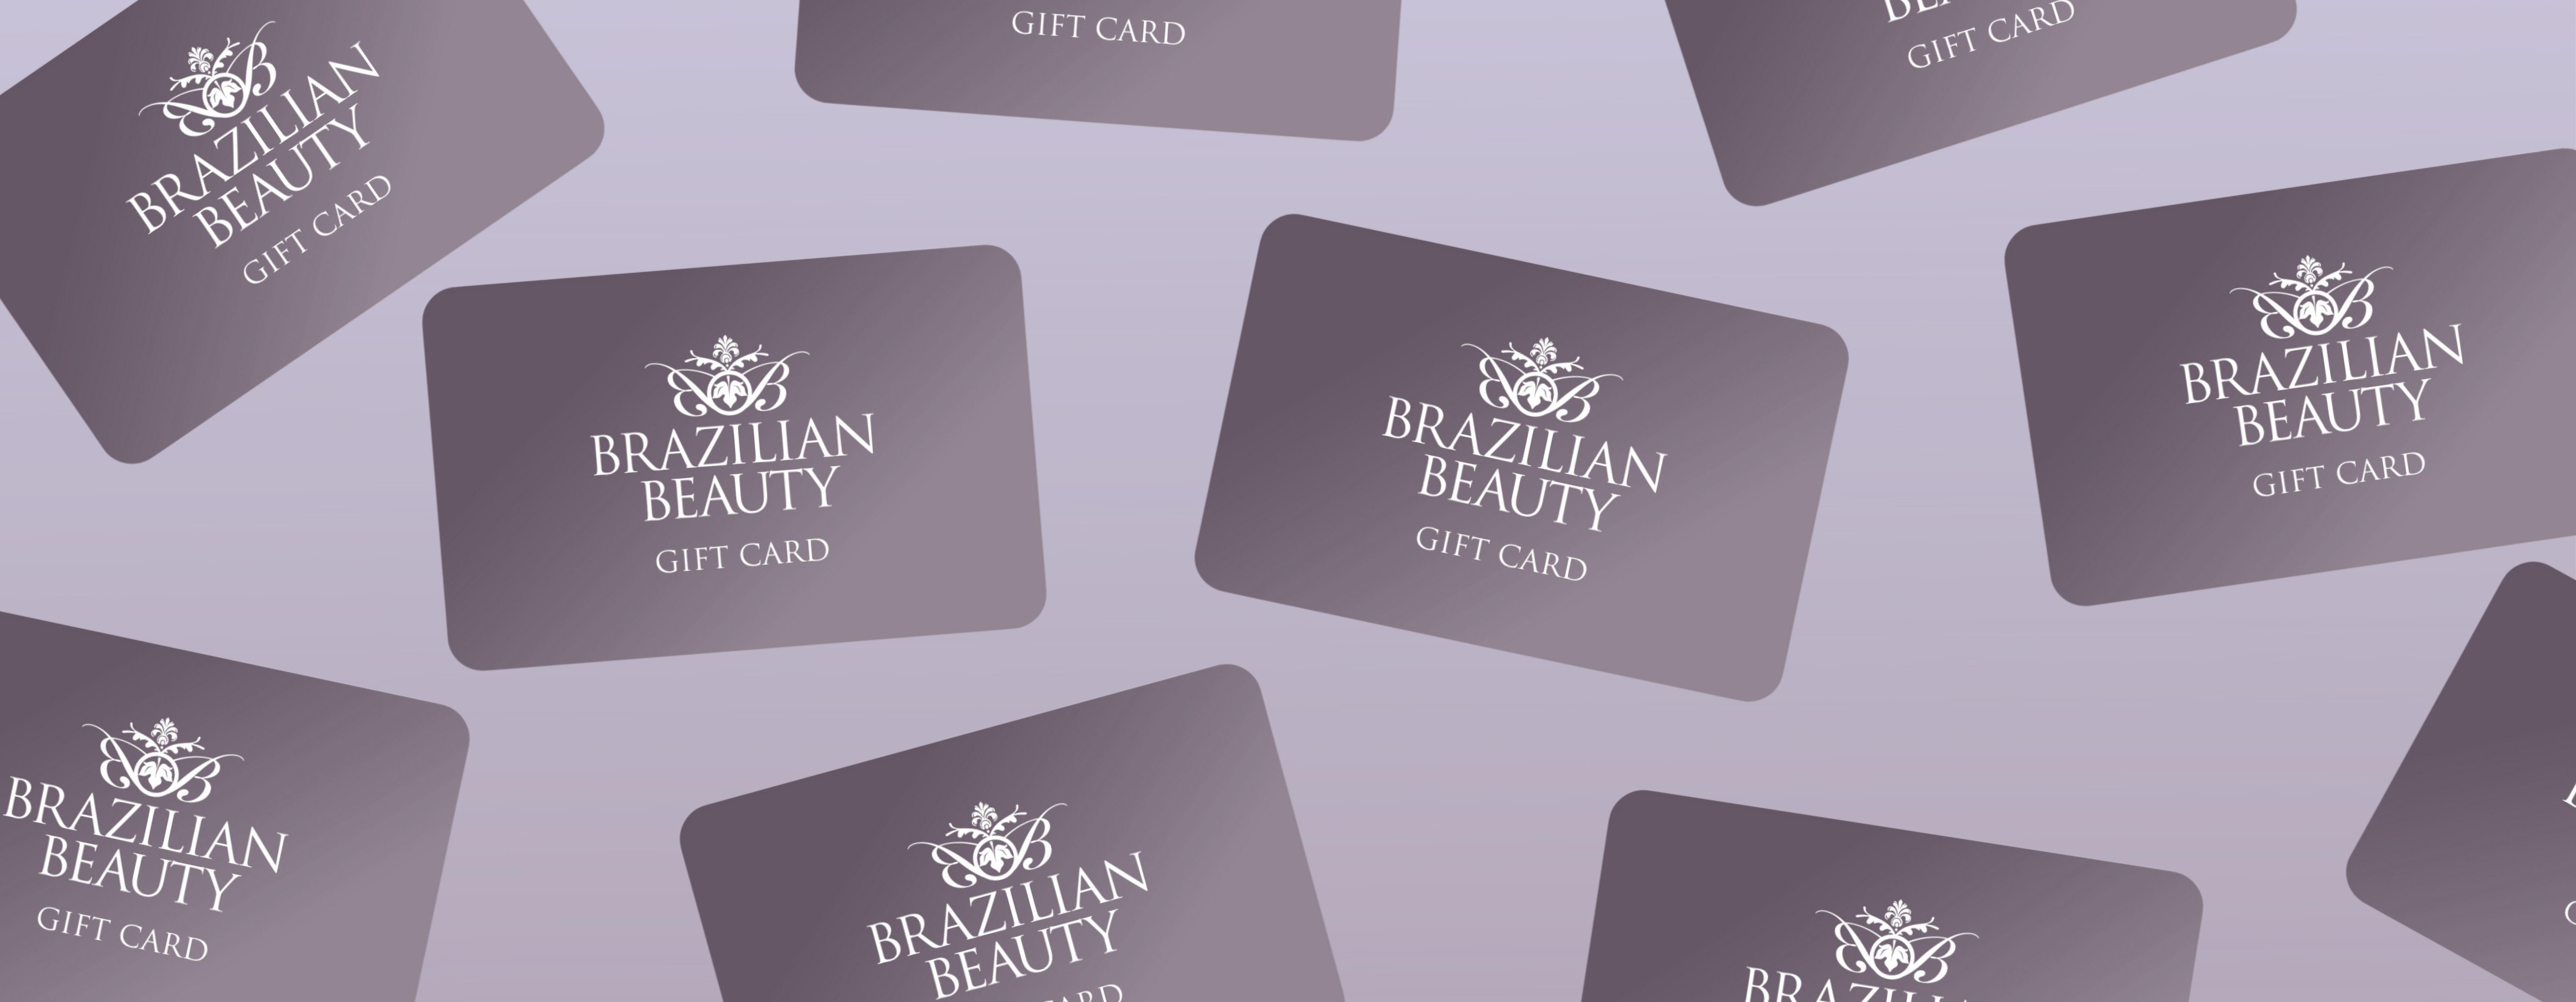 Mothers day gift - gift voucher - brazilian beauty - relaxation 